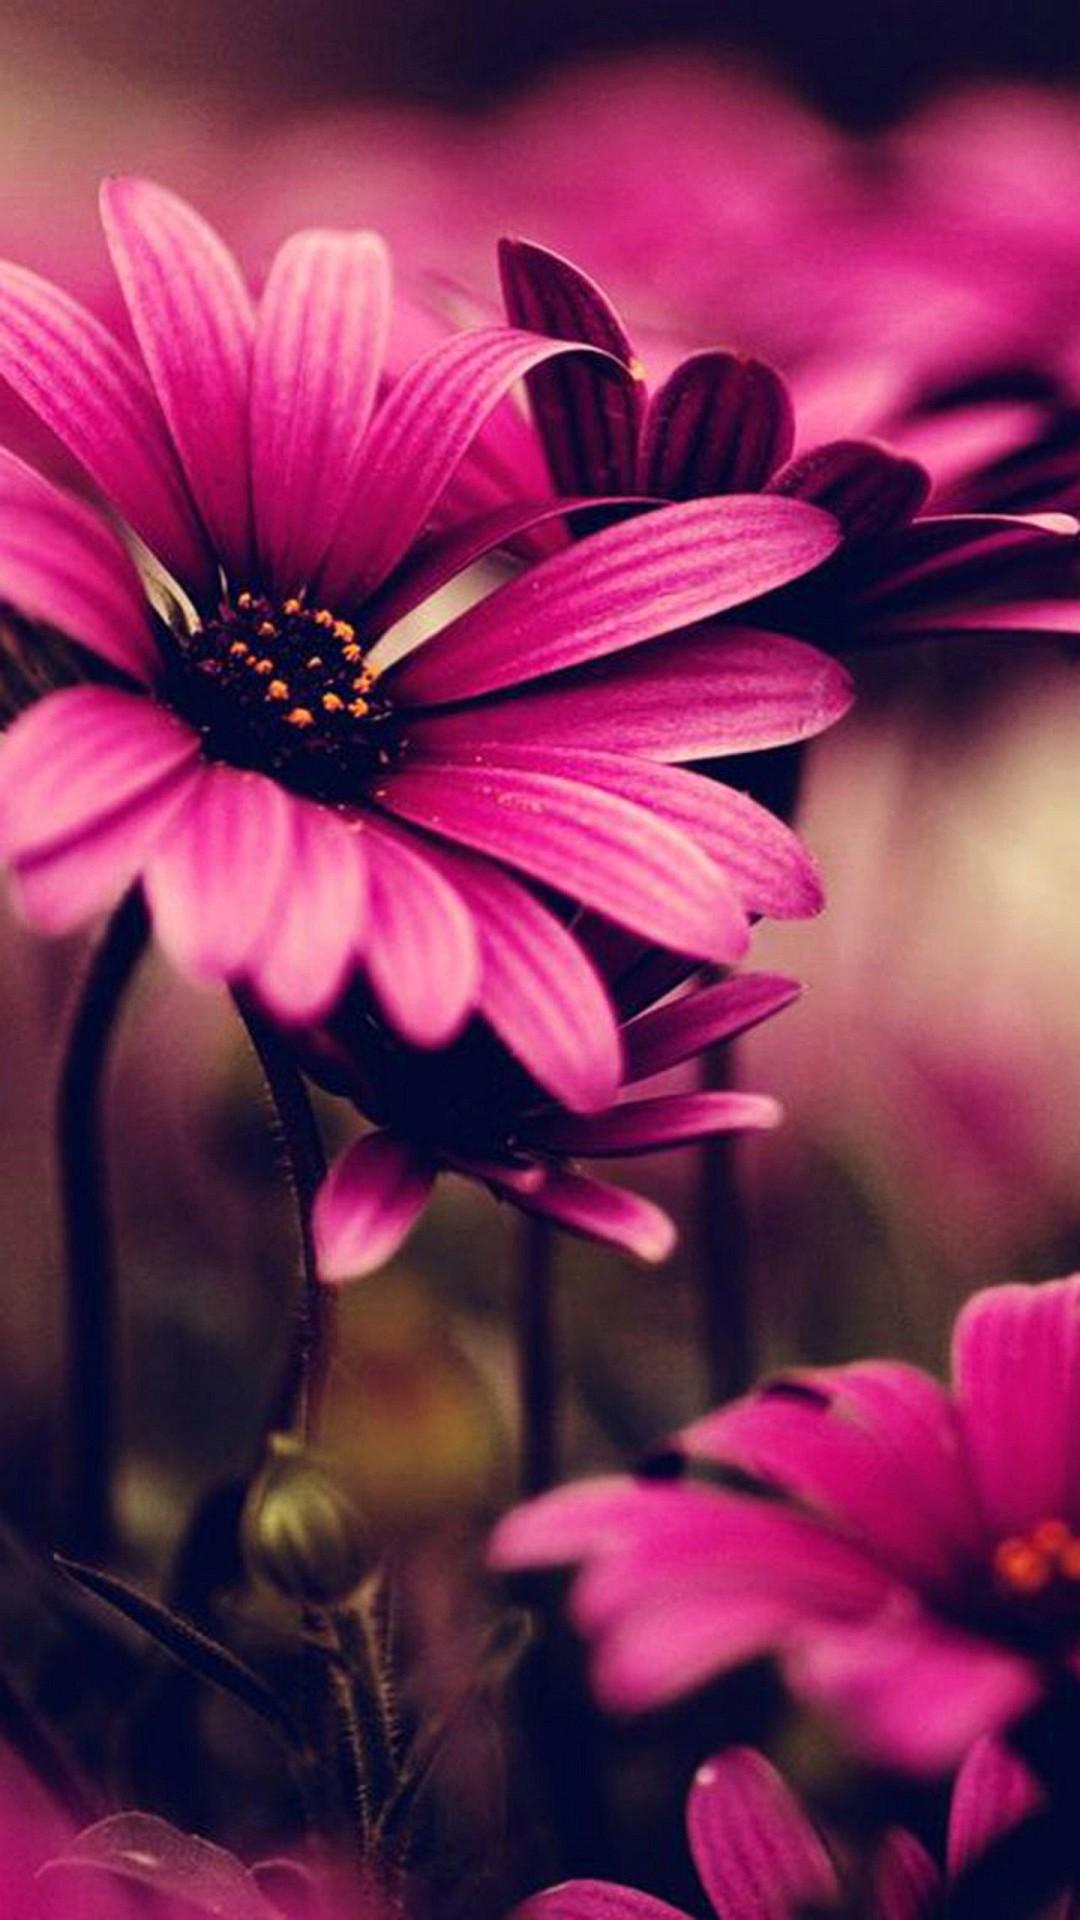 Awesome Flower Image for Mobile Wallpaper. Top Collection